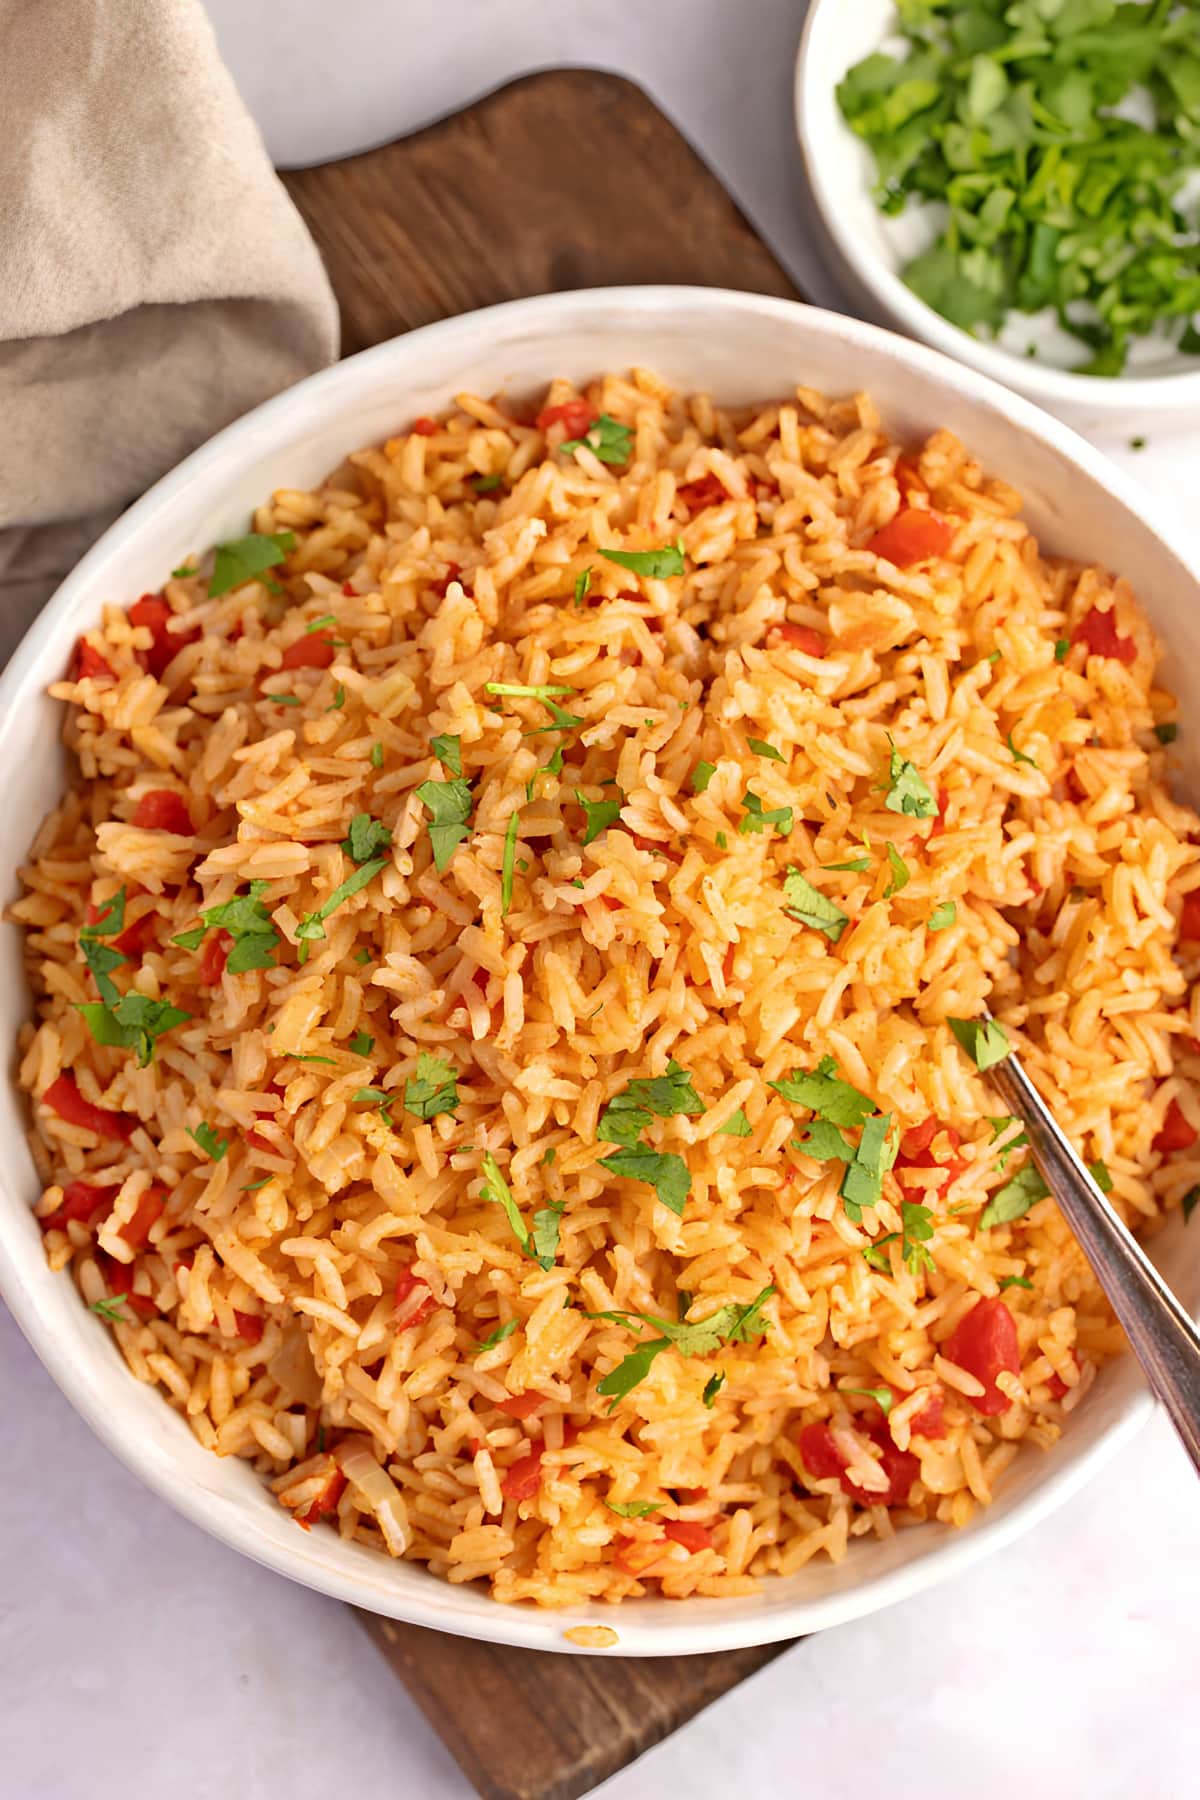 A bowl of Spanish rice with parsley leaves garnish.